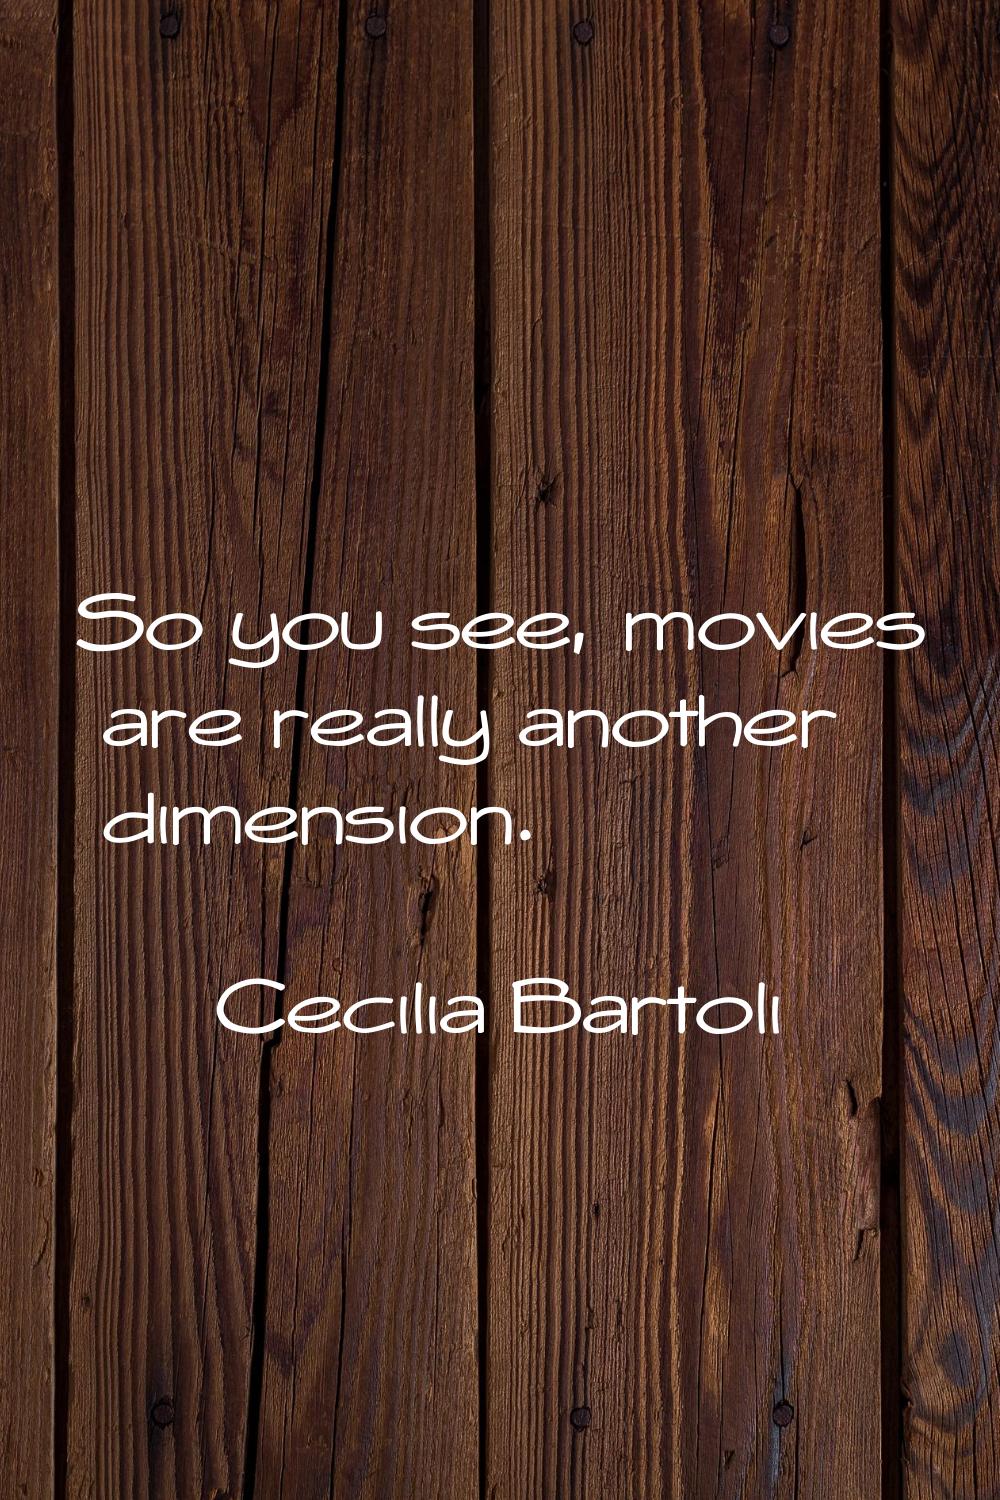 So you see, movies are really another dimension.